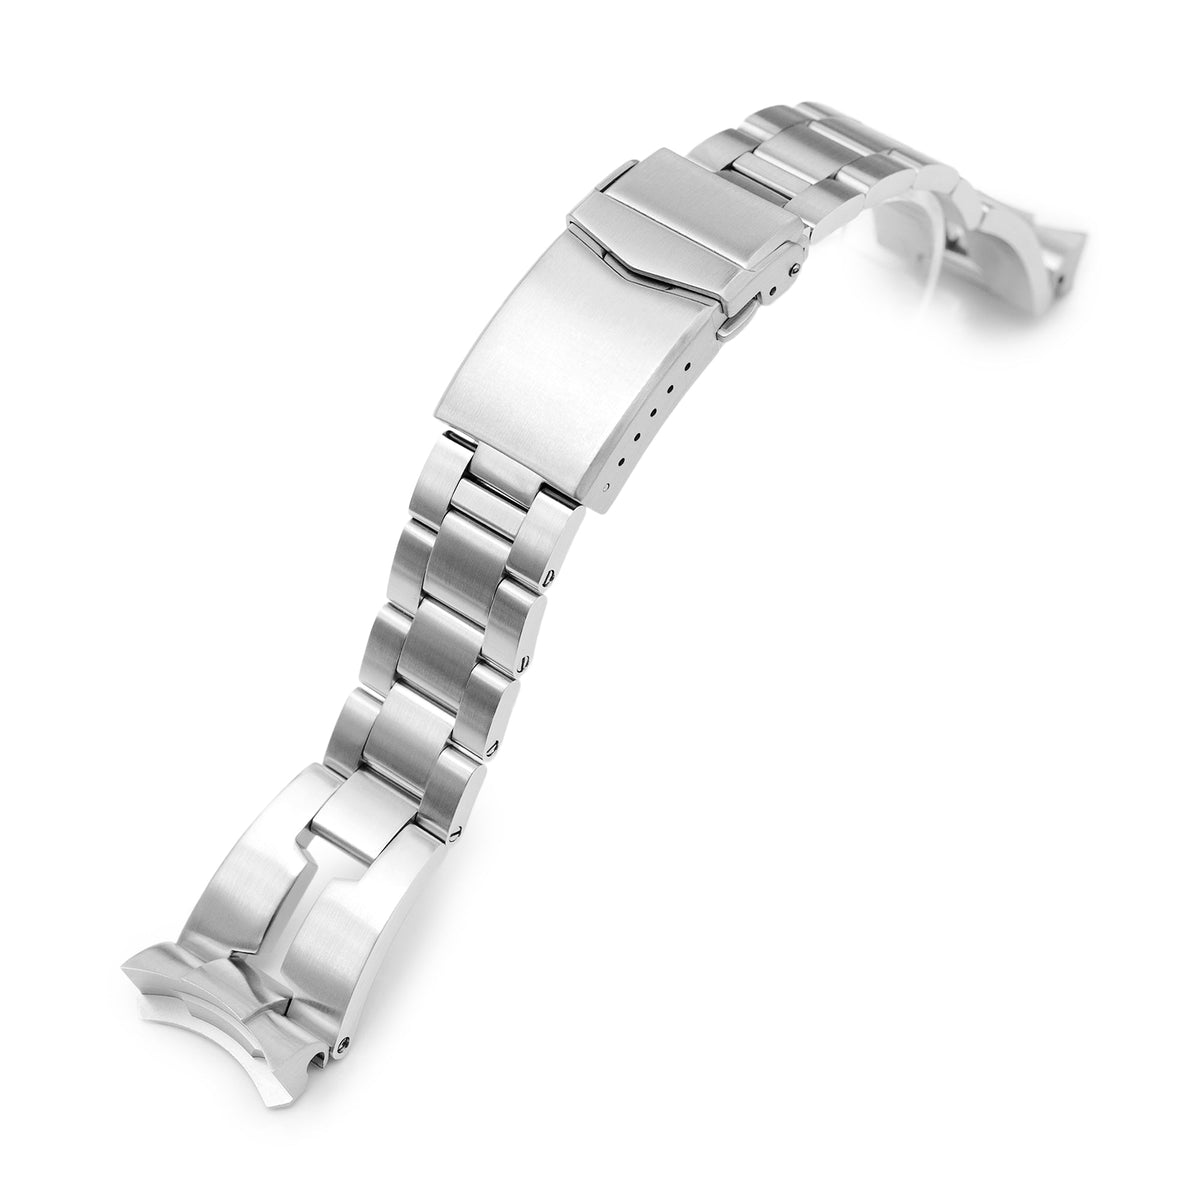 22mm Retro Razor Watch Band for Seiko 5 Sports 42.5mm, 316L Stainless Steel Brushed V-Clasp Strapcode Watch Bands